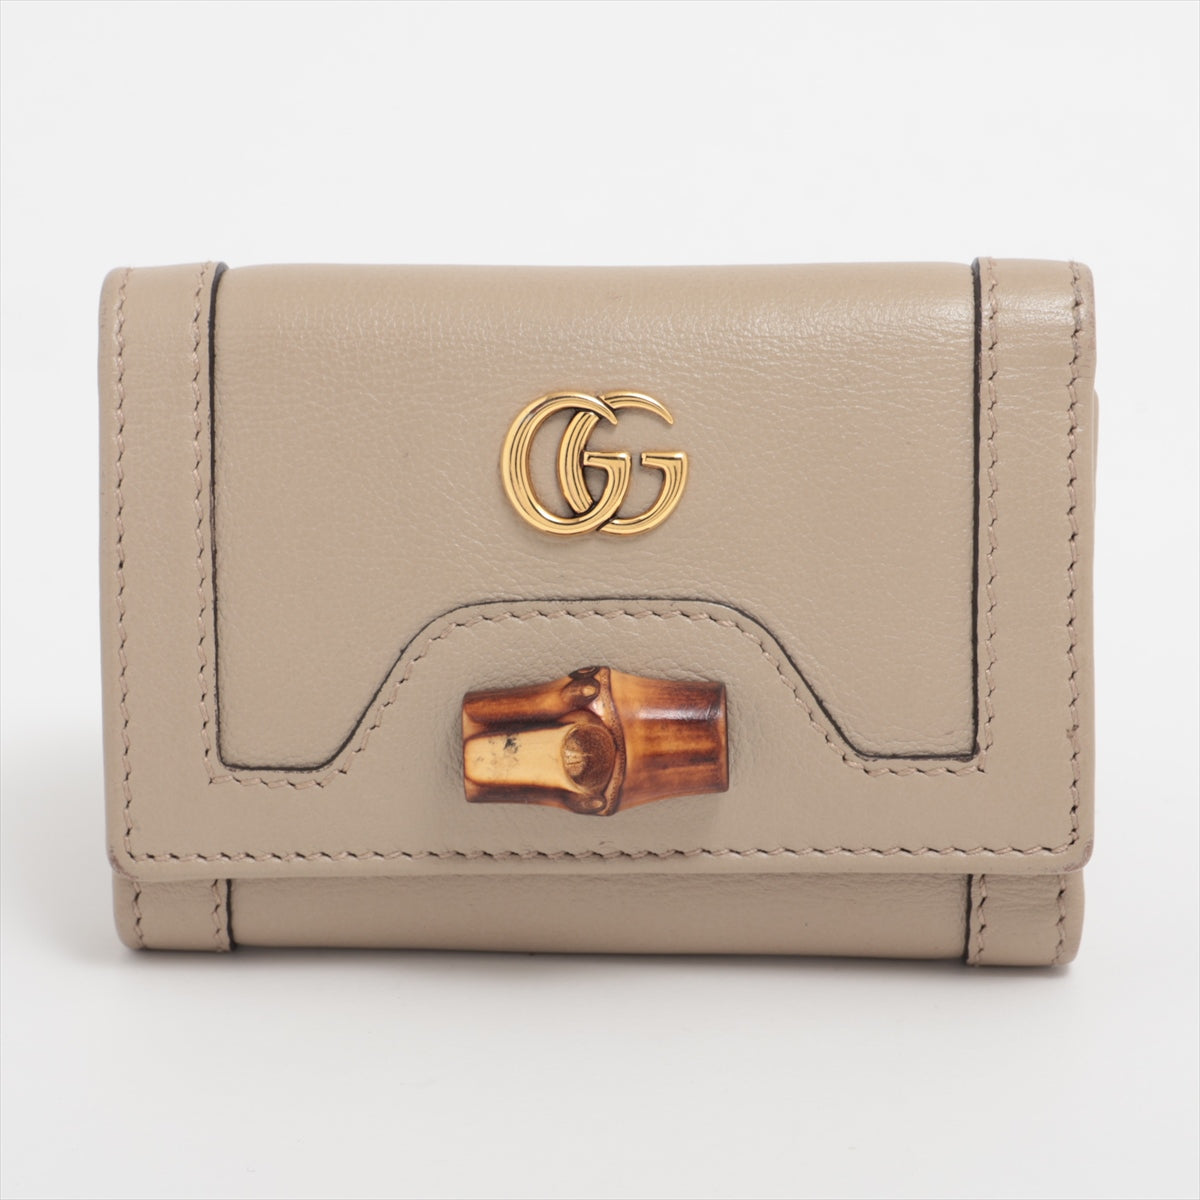 Gucci Bamboo 658633 Leather Compact Wallet Beagle